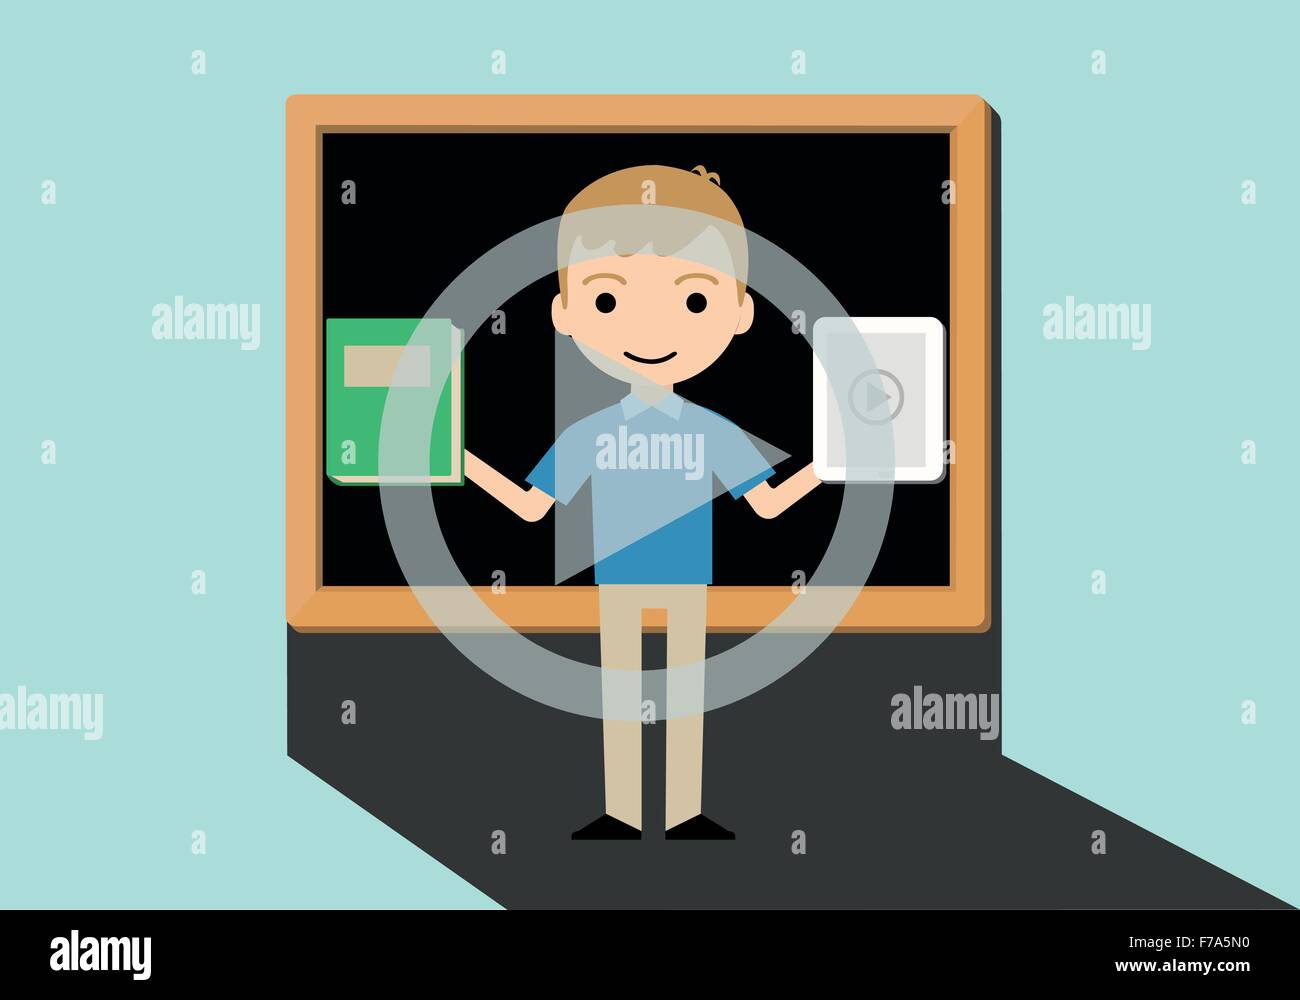 E-learning concept about study online vector illustration Stock Vector